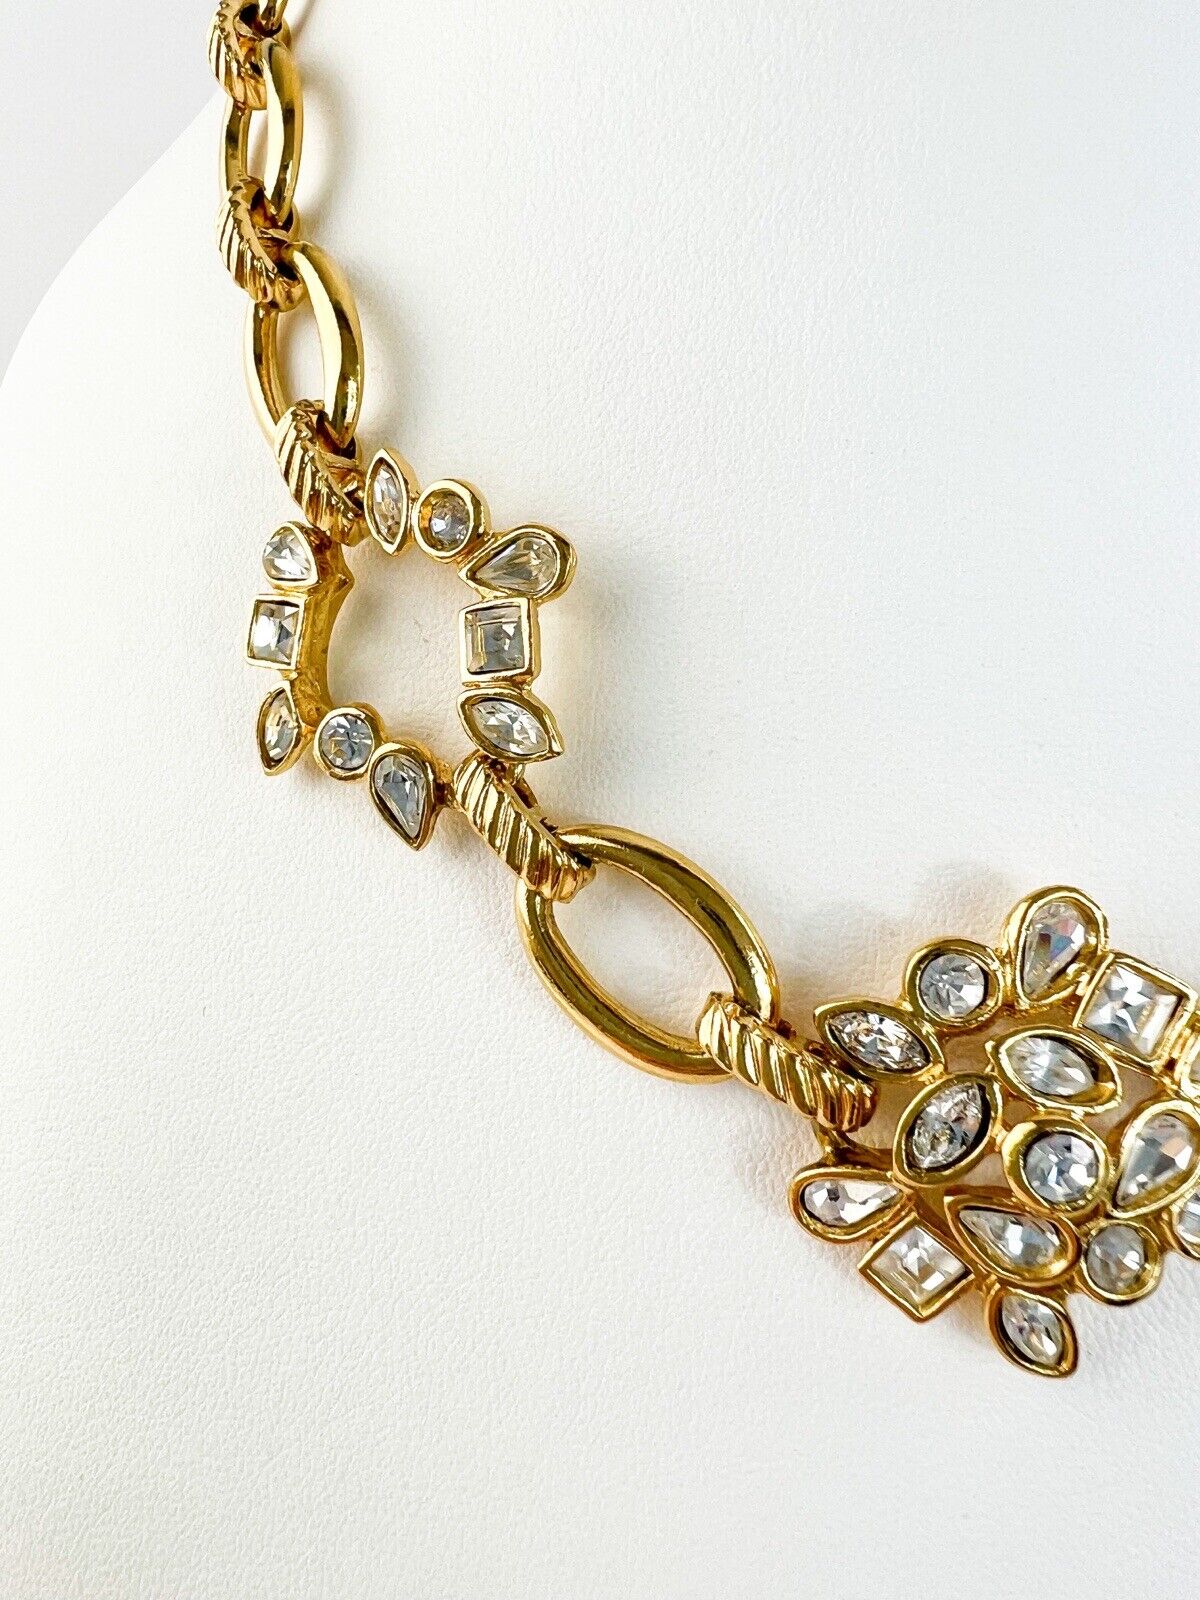 Vintage YSL Yves Saint Laurent Necklace, Floral Necklace, Gold Tone Necklace, Link Charm Necklace, Vintage Rhinestone, Jewelry for Women